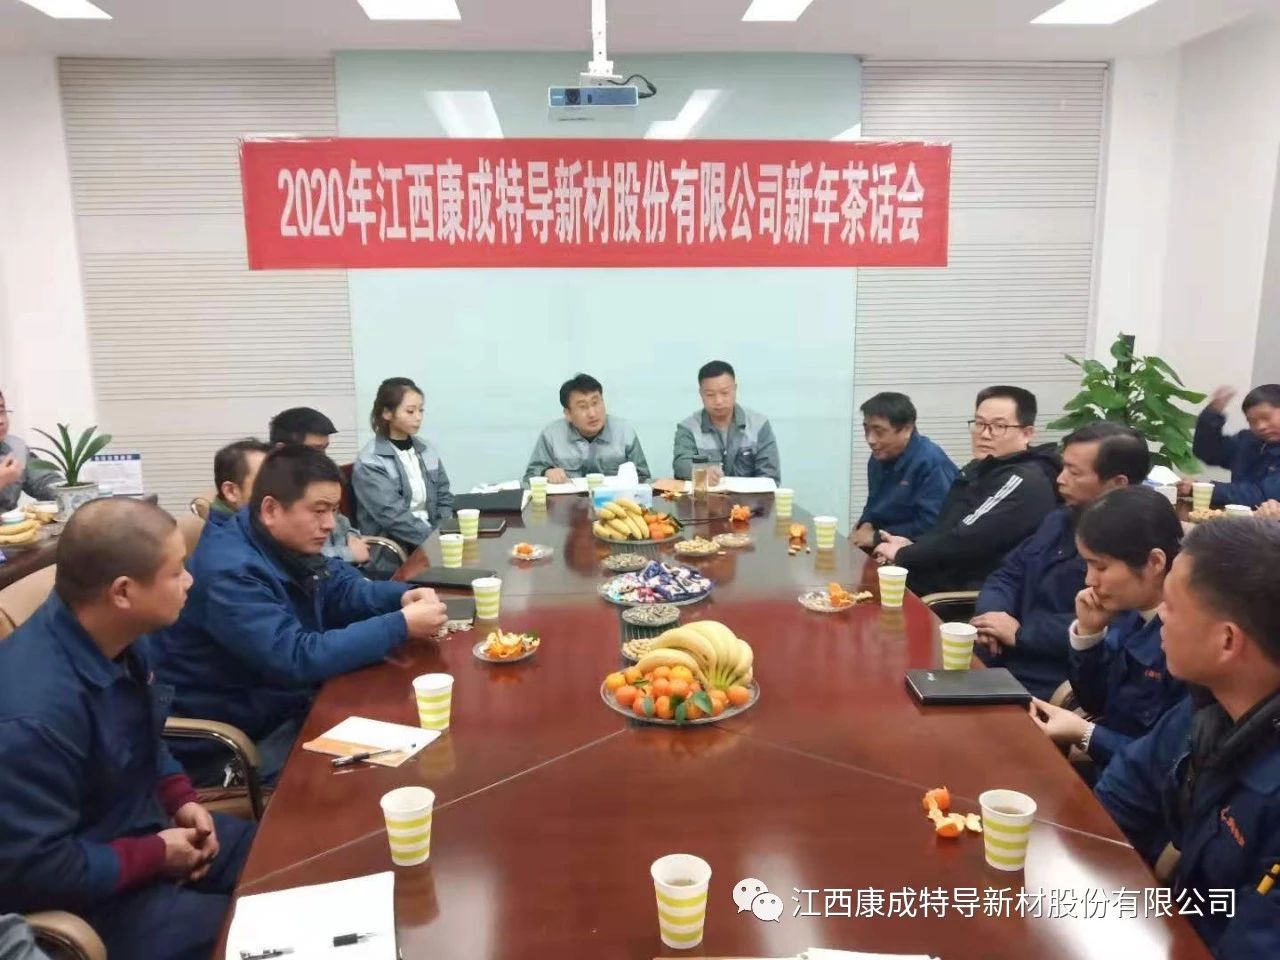 Jiangxi kangcheng special guide new material co., LTD. Held a New Year tea party